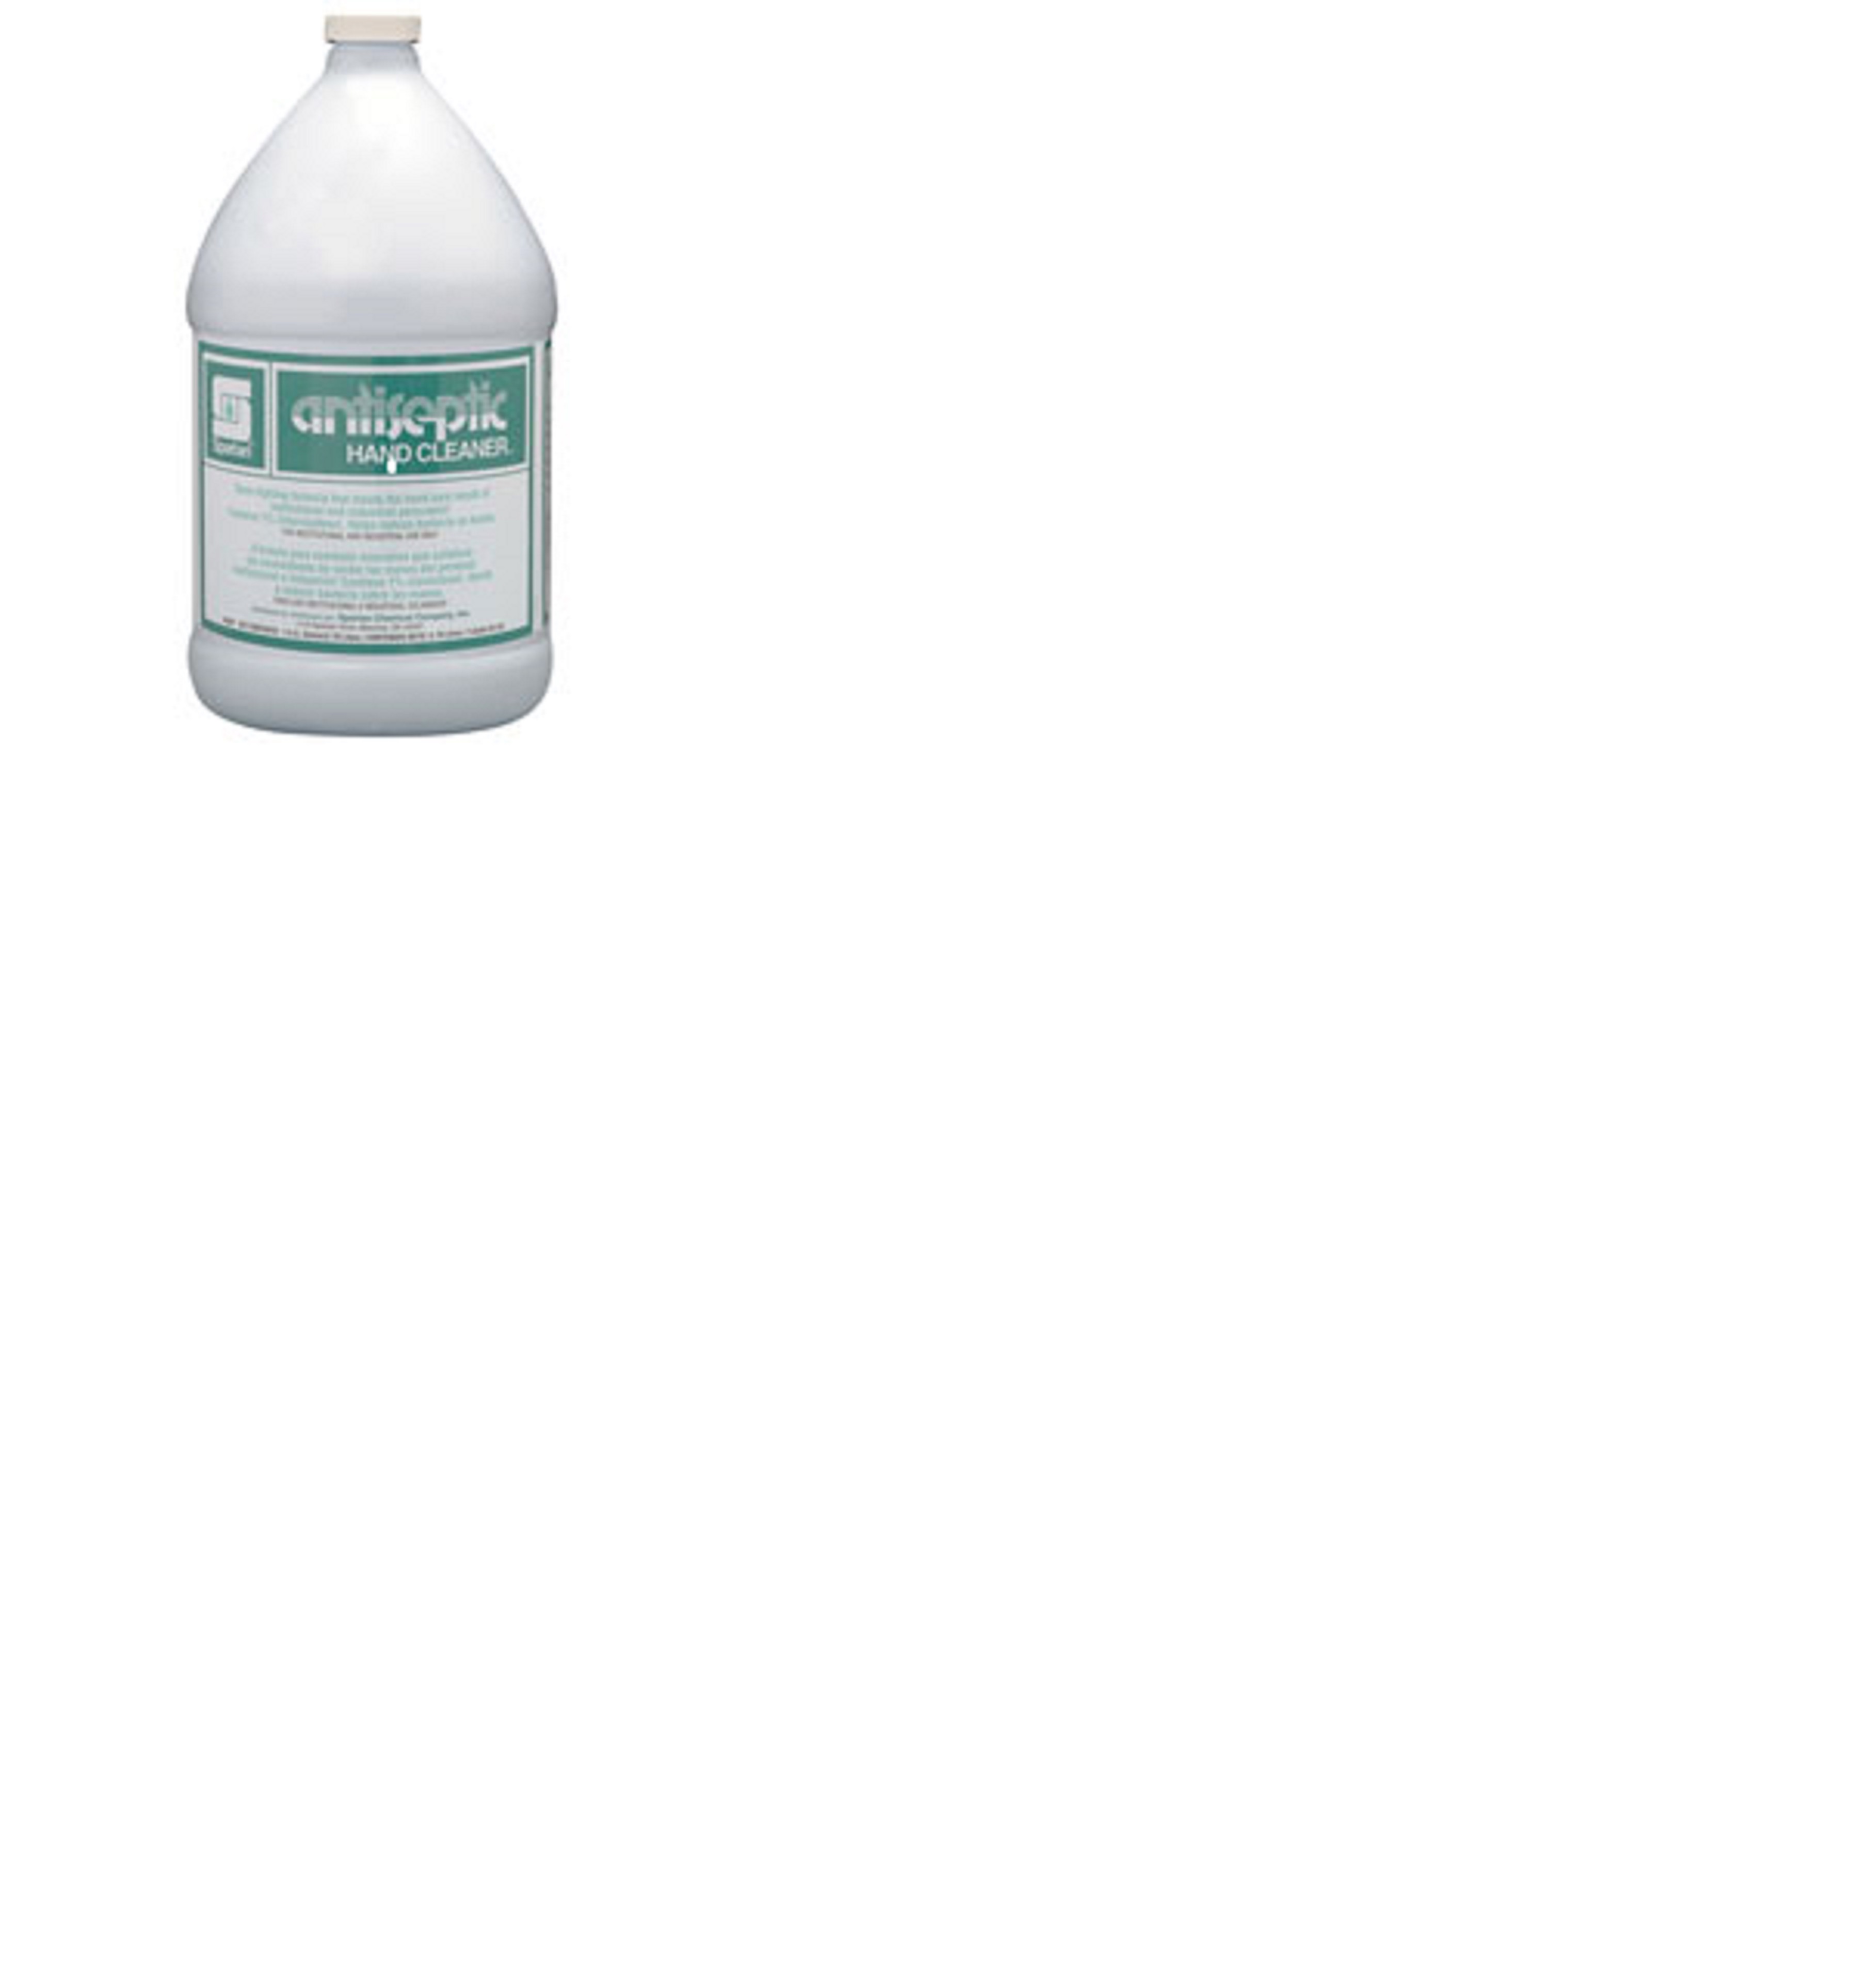 304301 ANTISEPTIC HAND CLEANER 4/1 GAL/CASE